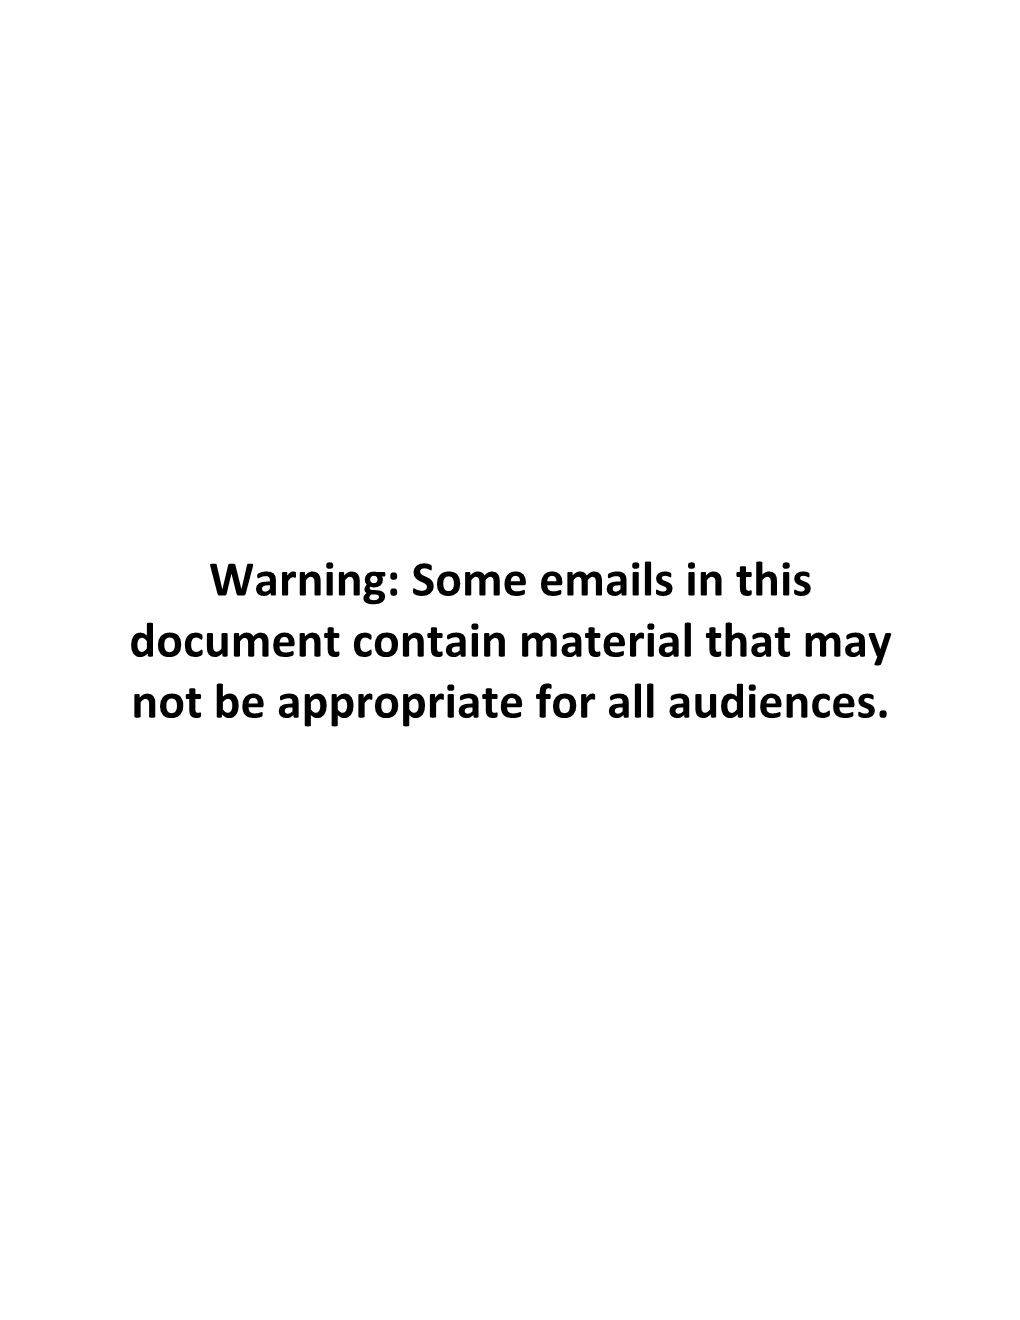 Some Emails in This Document Contain Material That May Not Be Appropriate for All Audiences